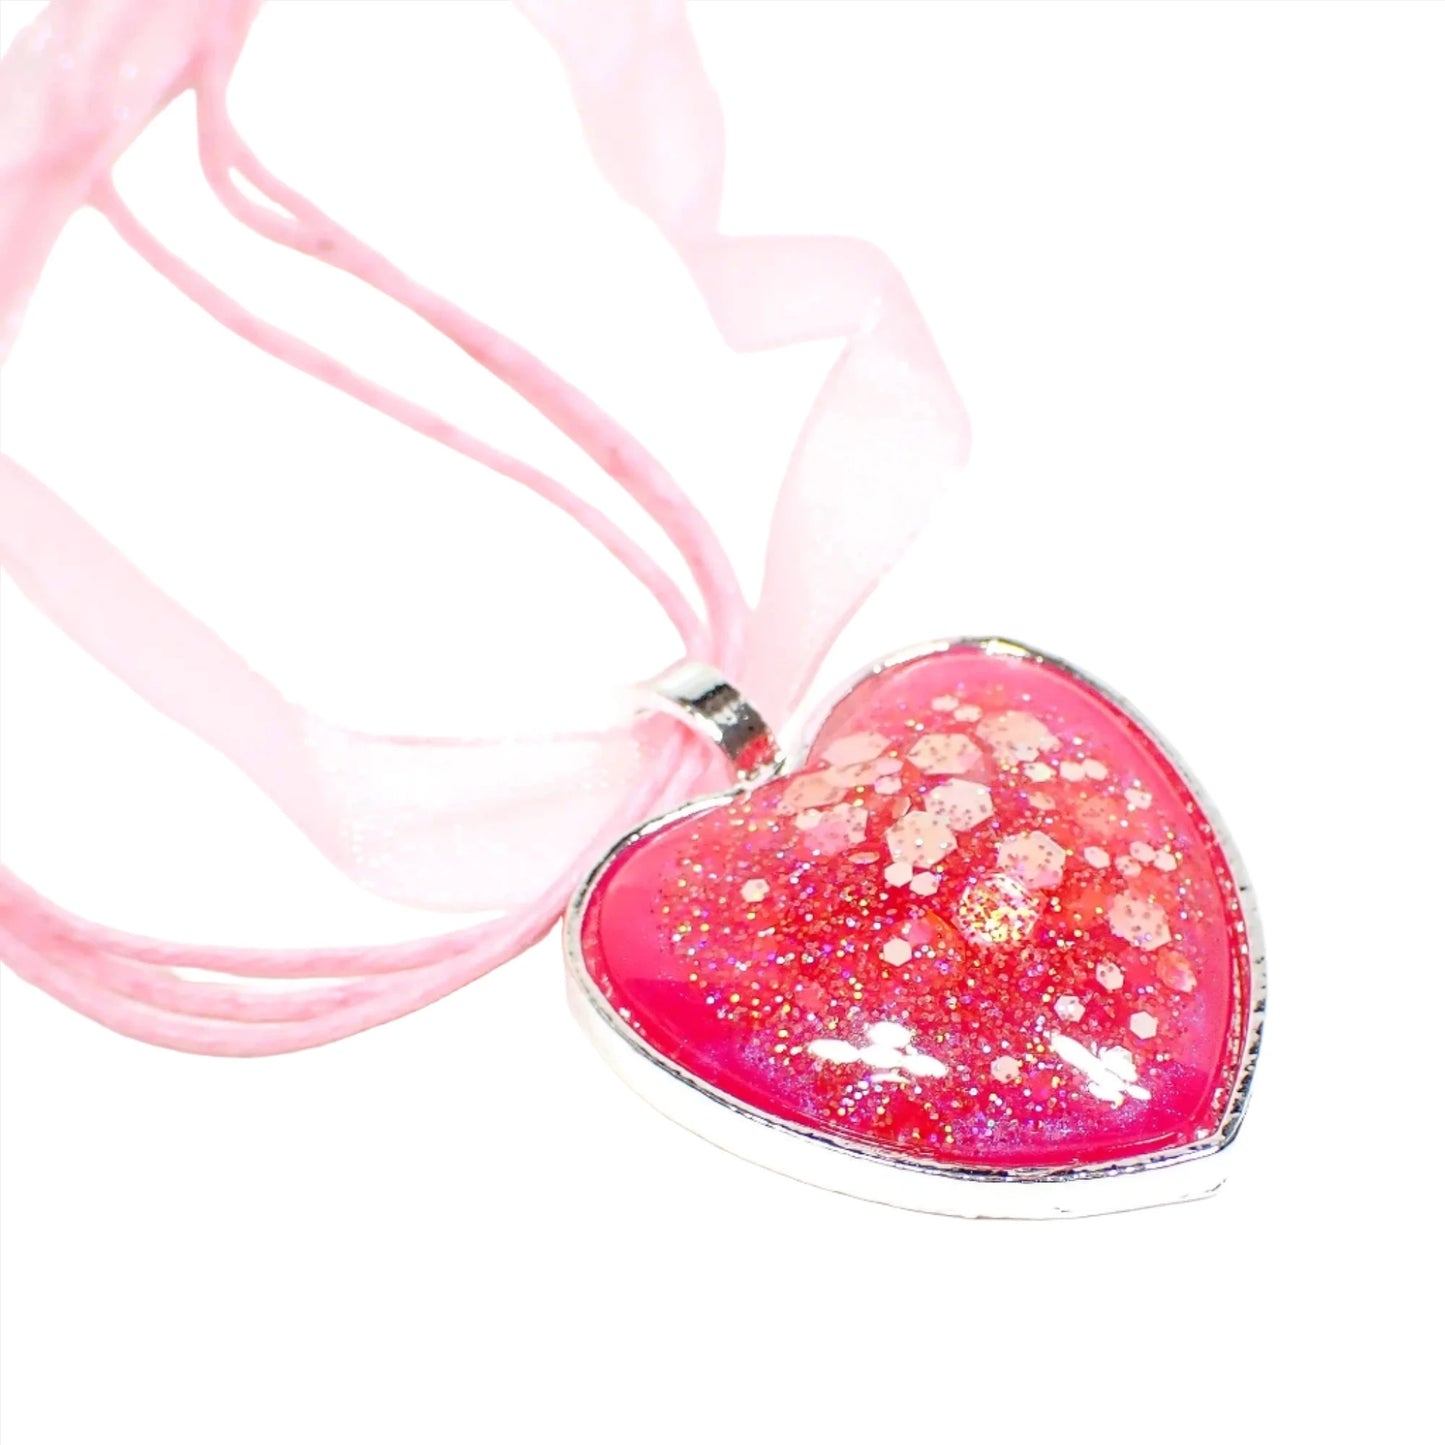 Enlarged view of the silver plated handmade resin heart pendant necklace. The necklace has three strands of light pink faux leather cord and a strand of organza ribbon. The heart has a silver color setting with bright pearly pink resin and chunky iridescent glitter.